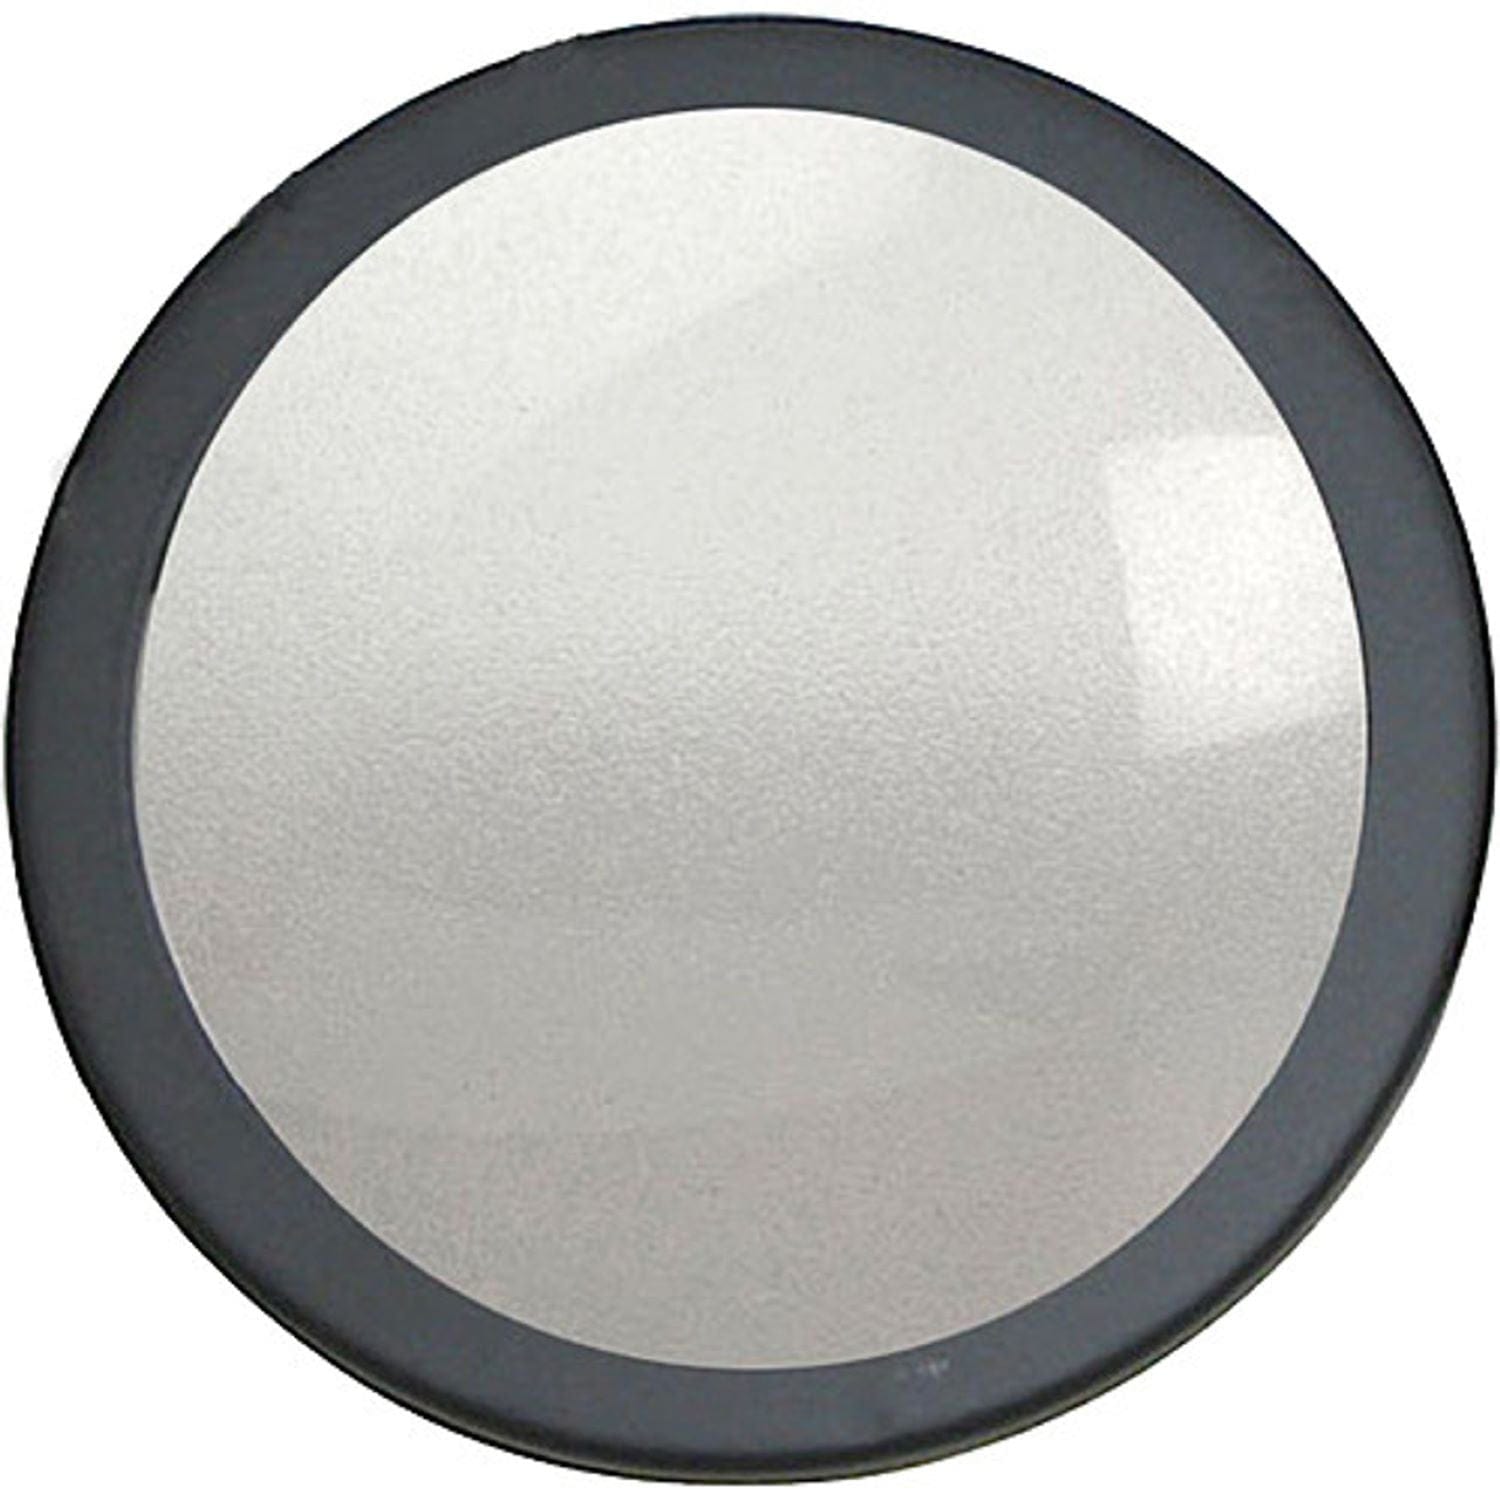 ETC SELON-7.5 D40/Cspar Narrow Oval Diffuser In Frame, Black - PSSL ProSound and Stage Lighting